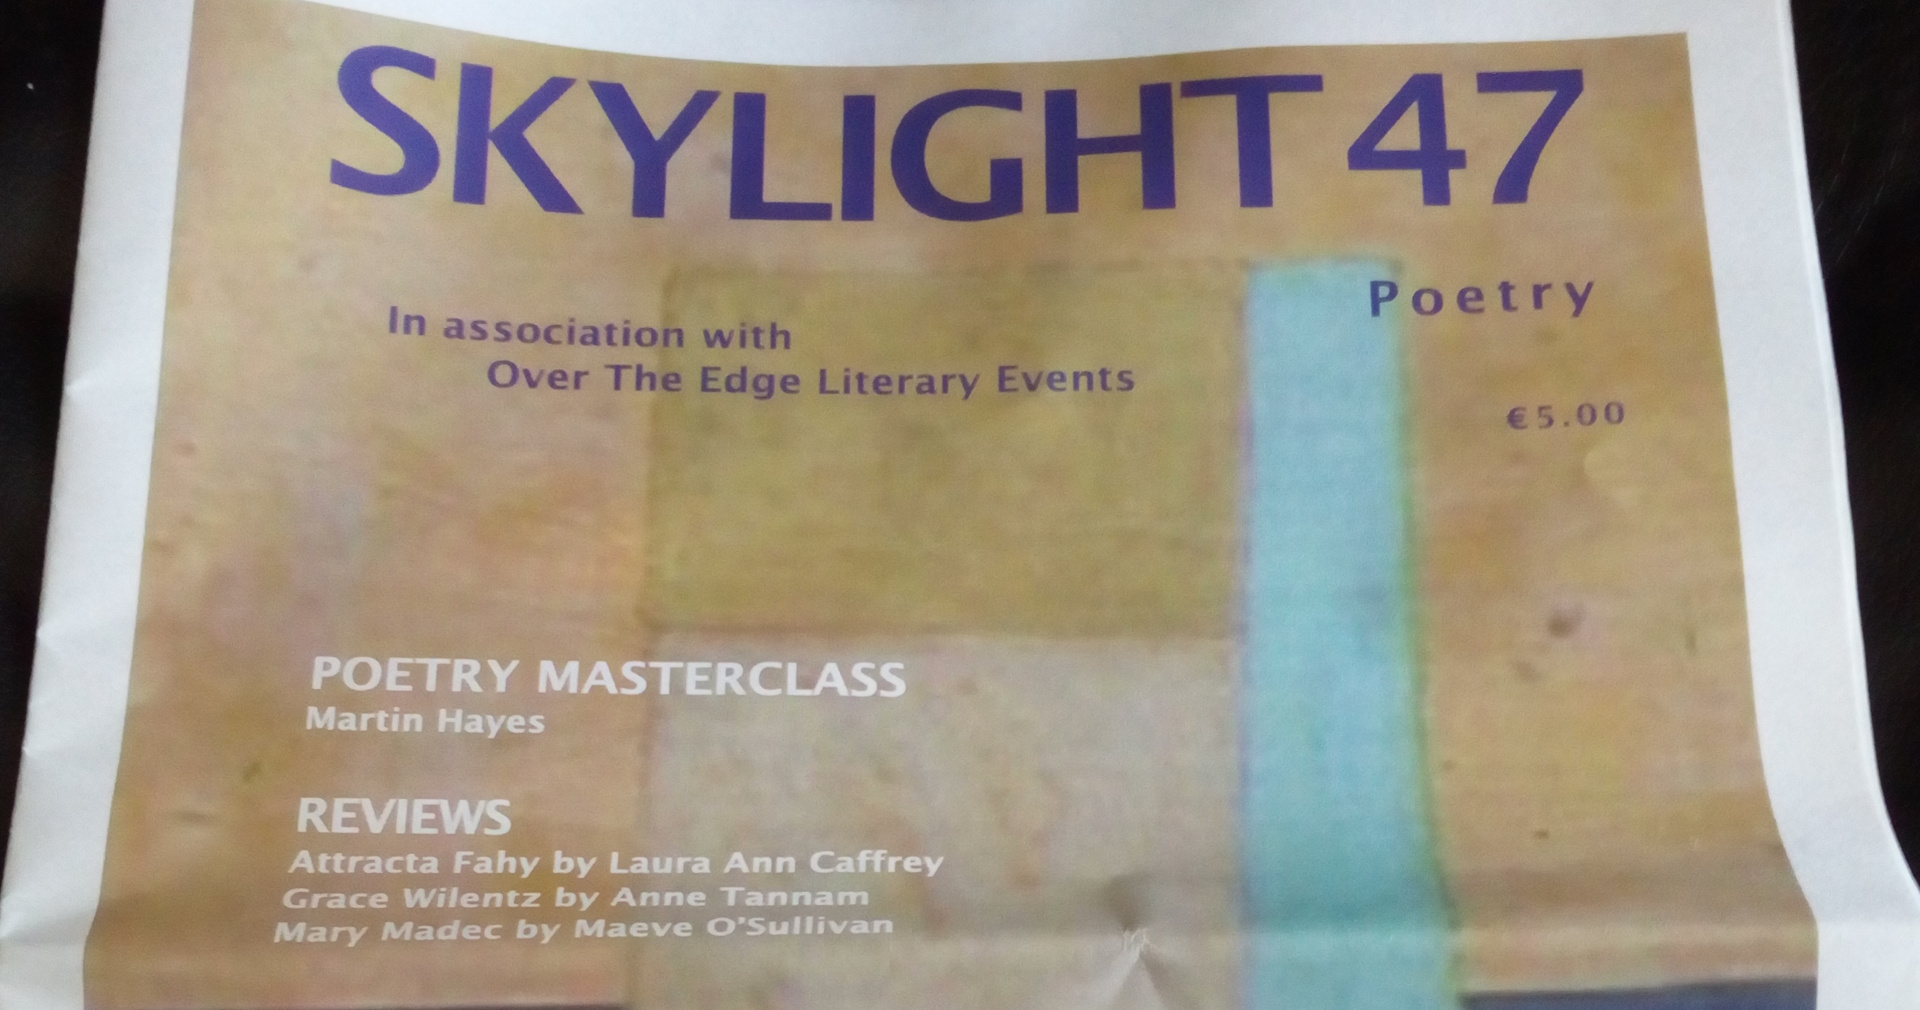 Issue 13 of Skylight 47 July 2020